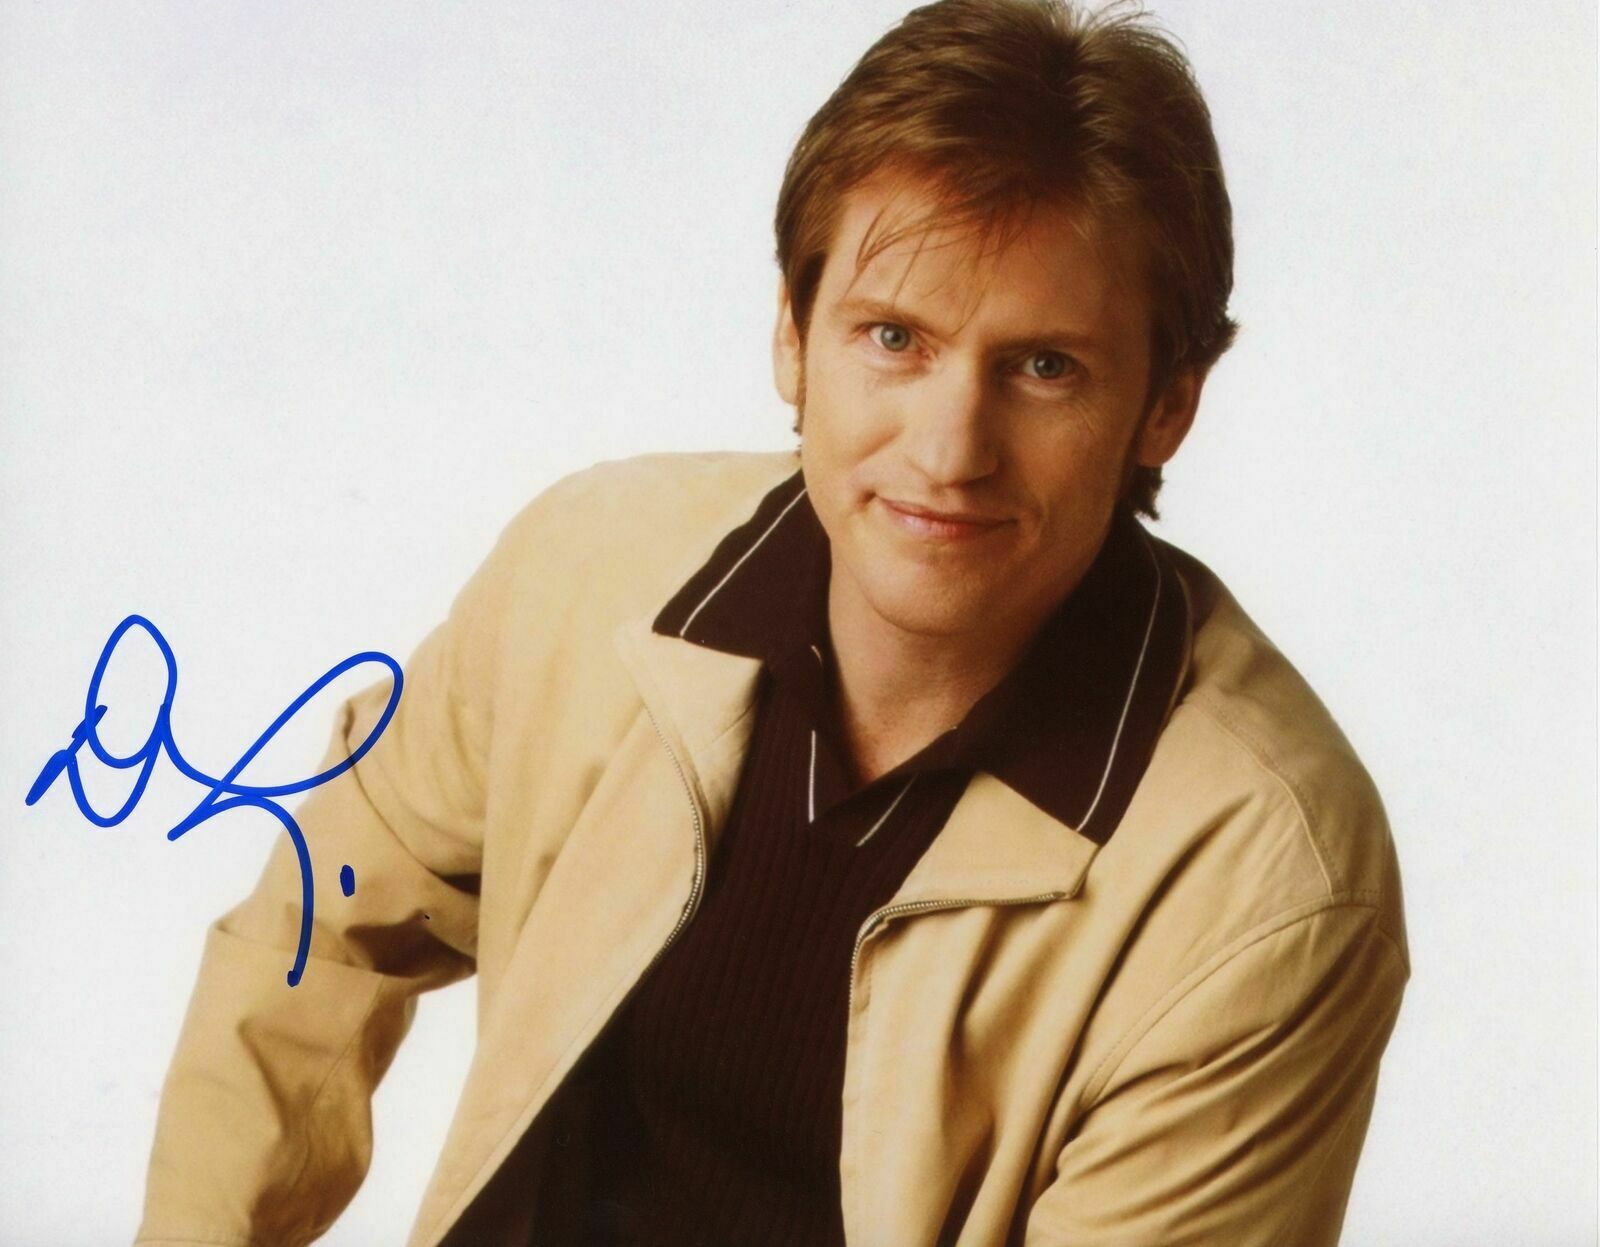 Denis Leary Autographed Signed 8x10 Photo ( Draft Day ) Reprint